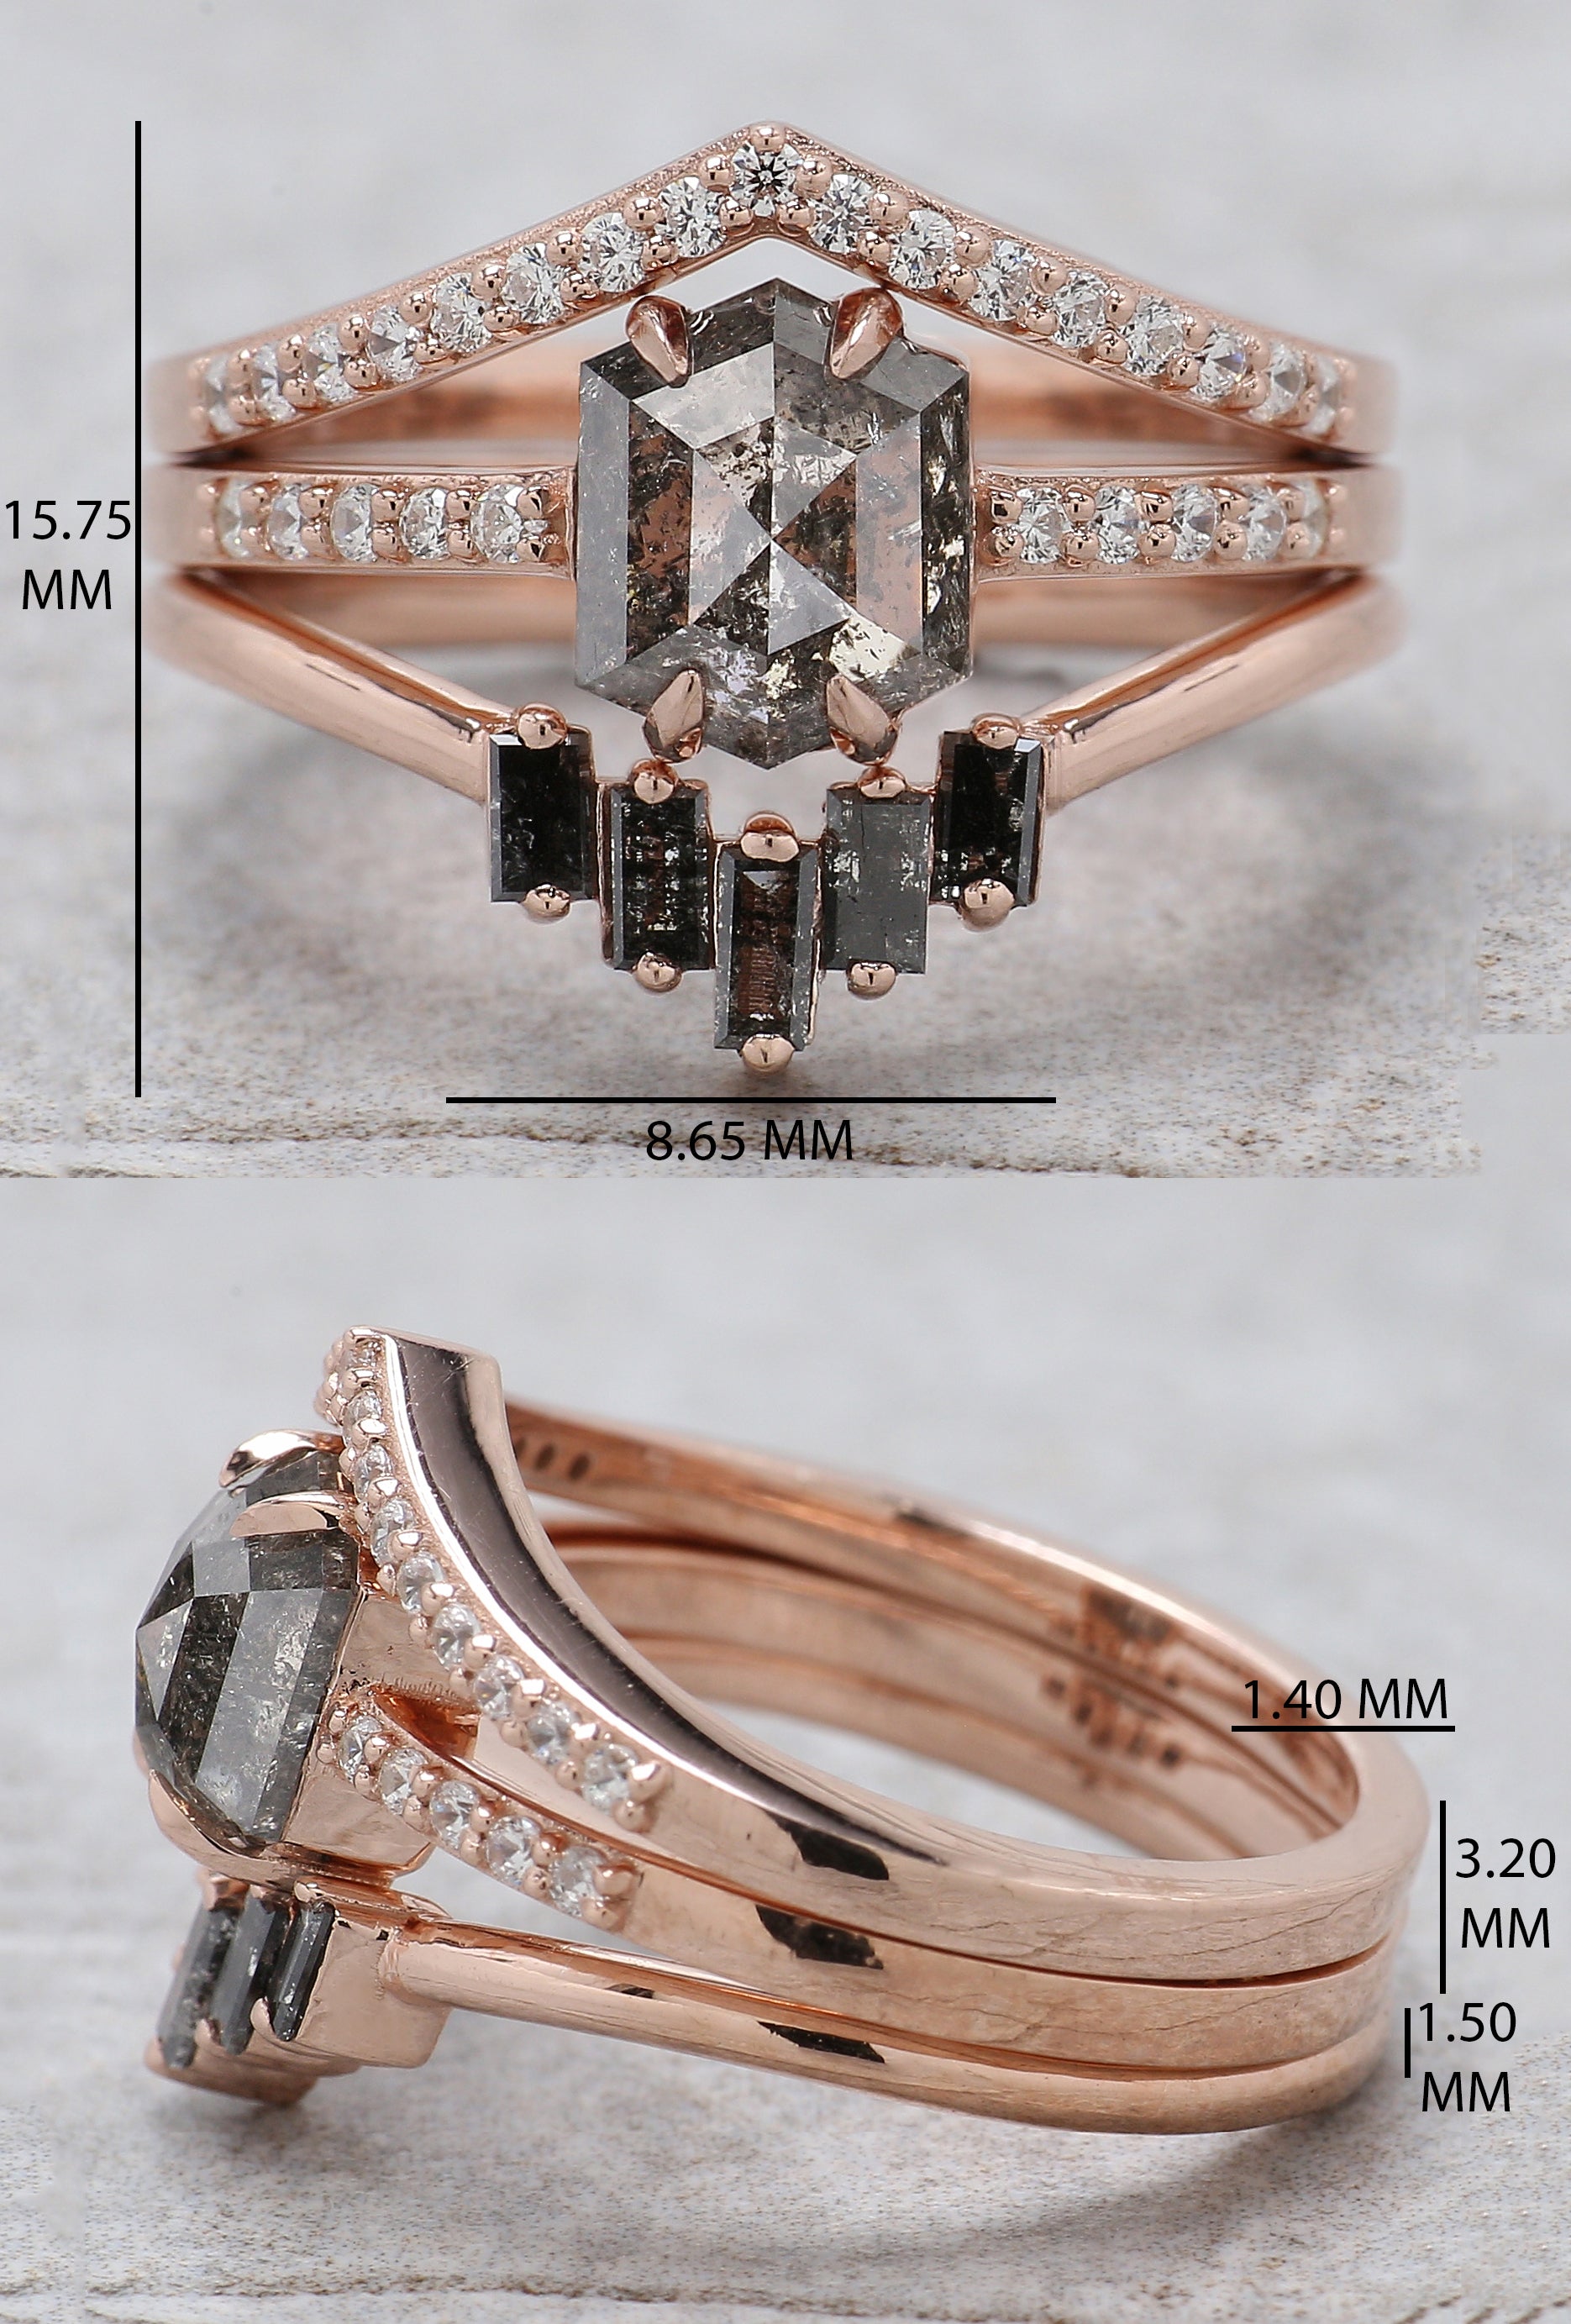 Hexagon Salt And Pepper Diamond Ring 1.41 Ct 7.50 MM Hexagon Cut Diamond Ring 14K Solid Rose Gold Silver Engagement Ring Gift For Her QL1262